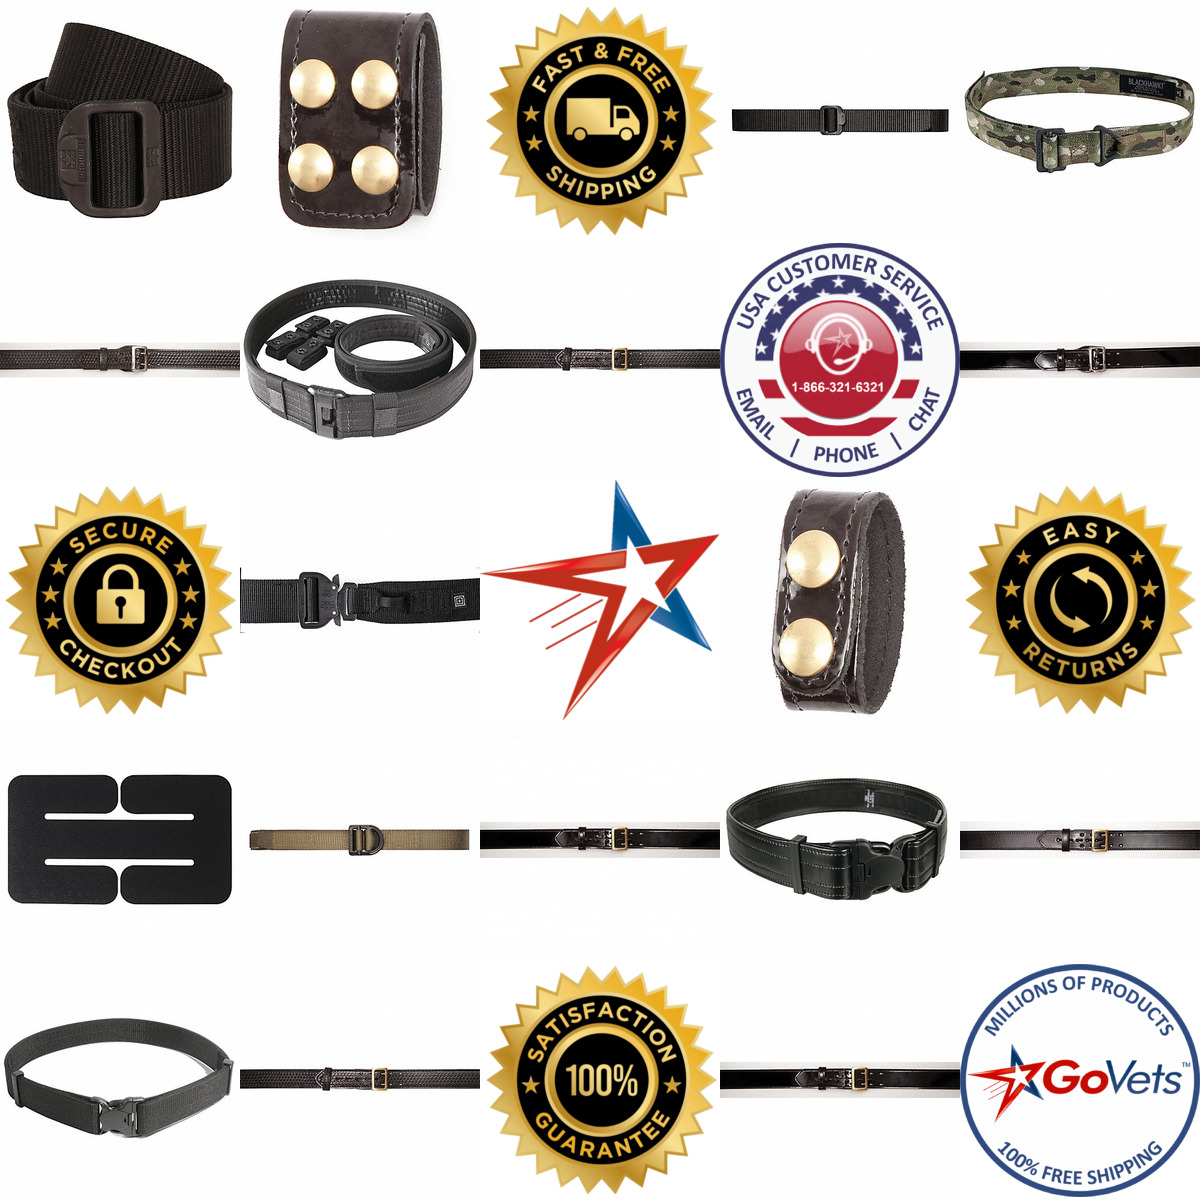 A selection of Duty Belts and Harnesses products on GoVets